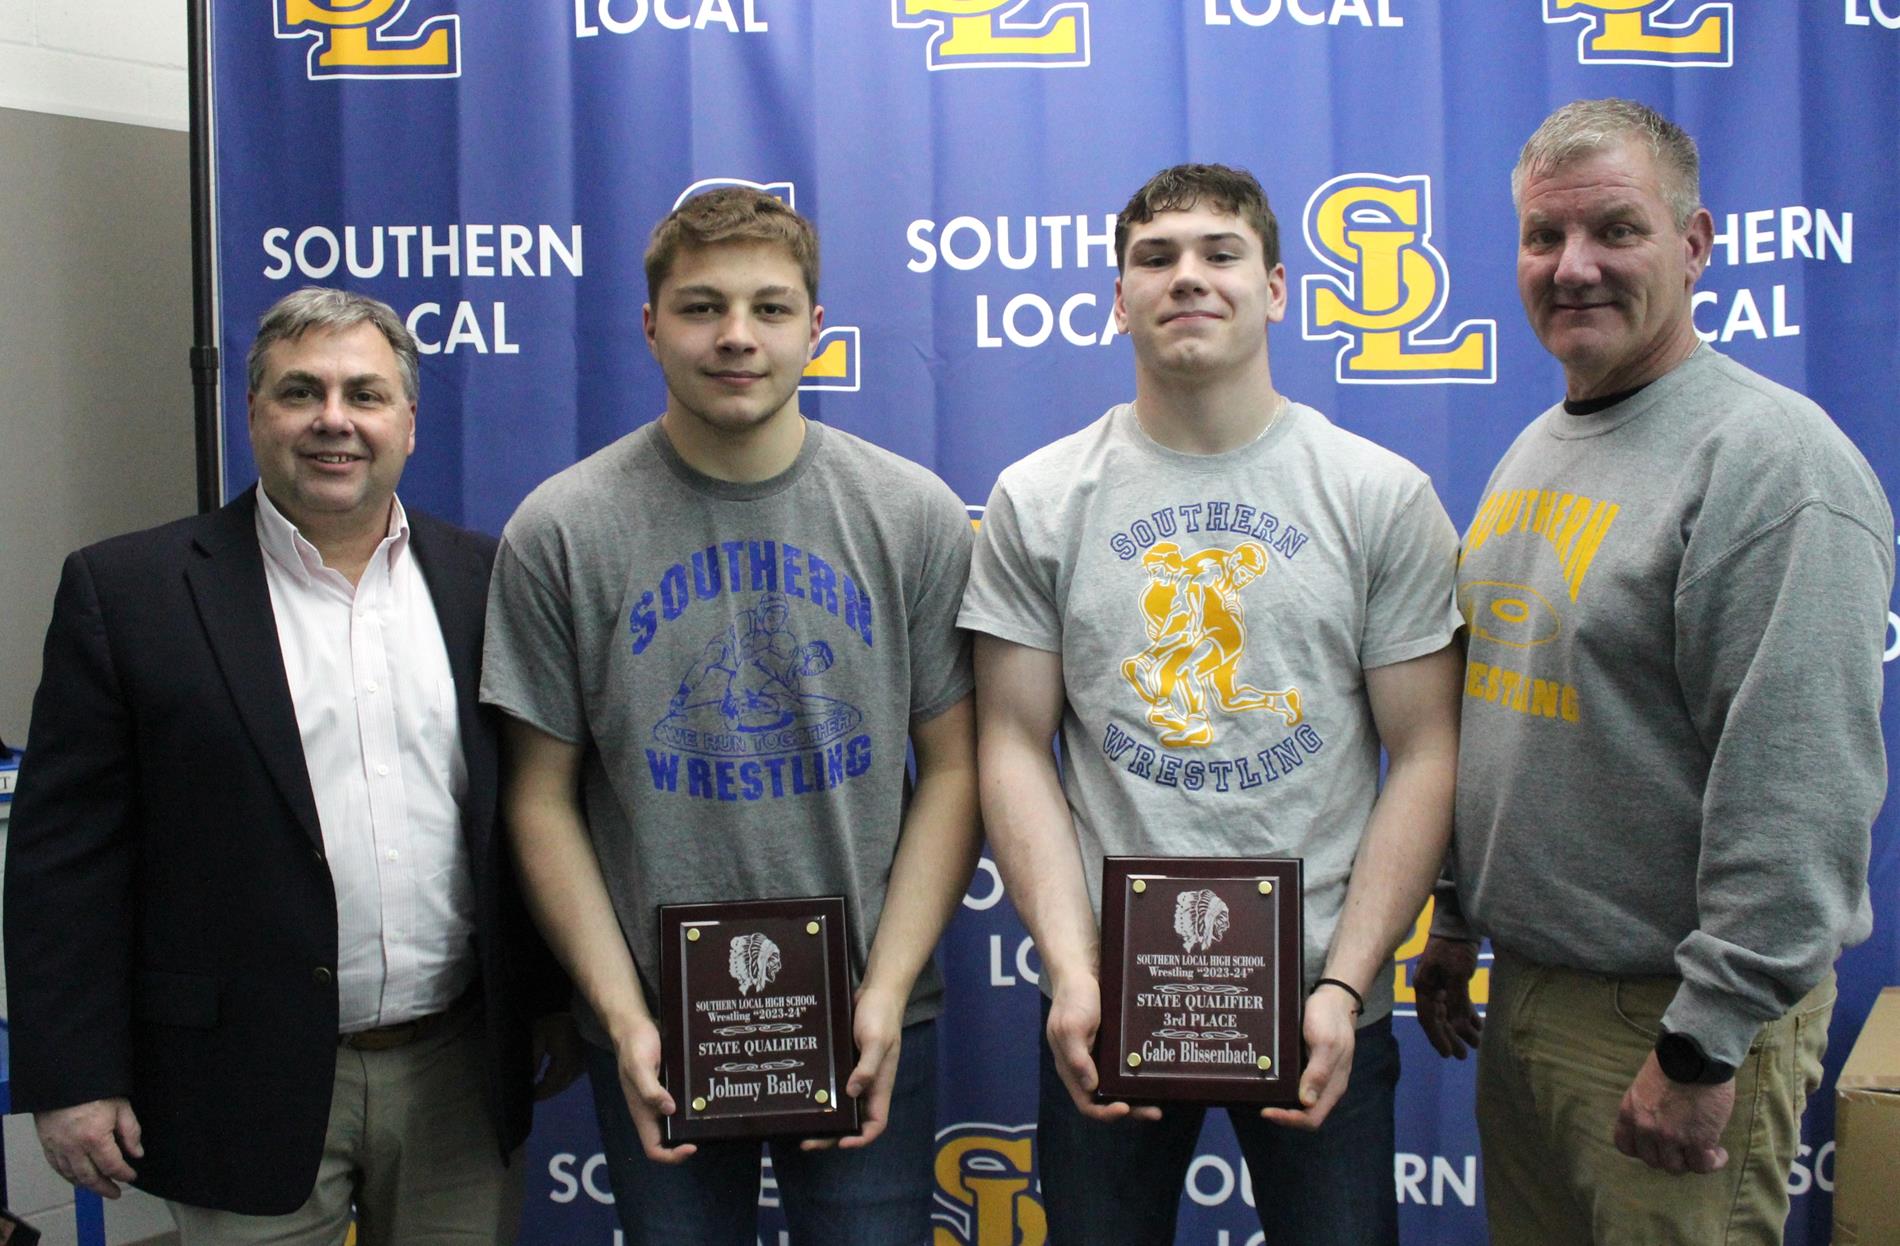 Wrestlers recognized at Board meeting